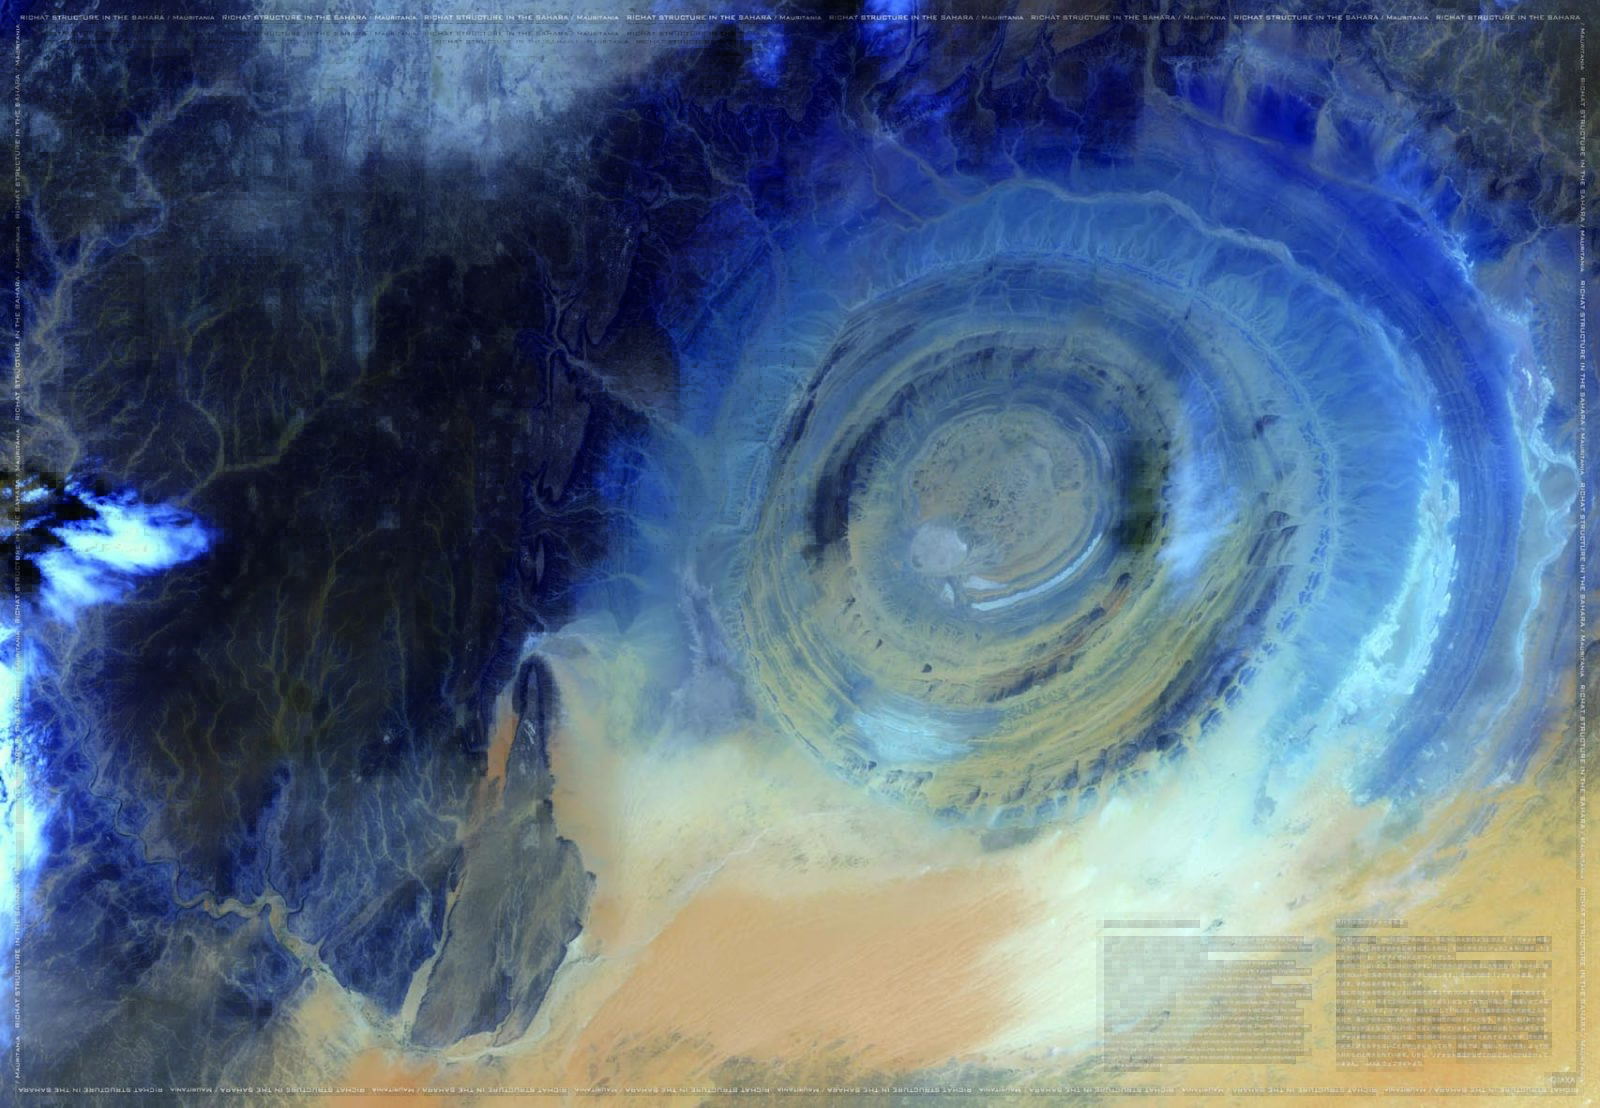 0_RICHAT STRUCTURE IN THE SAHARA